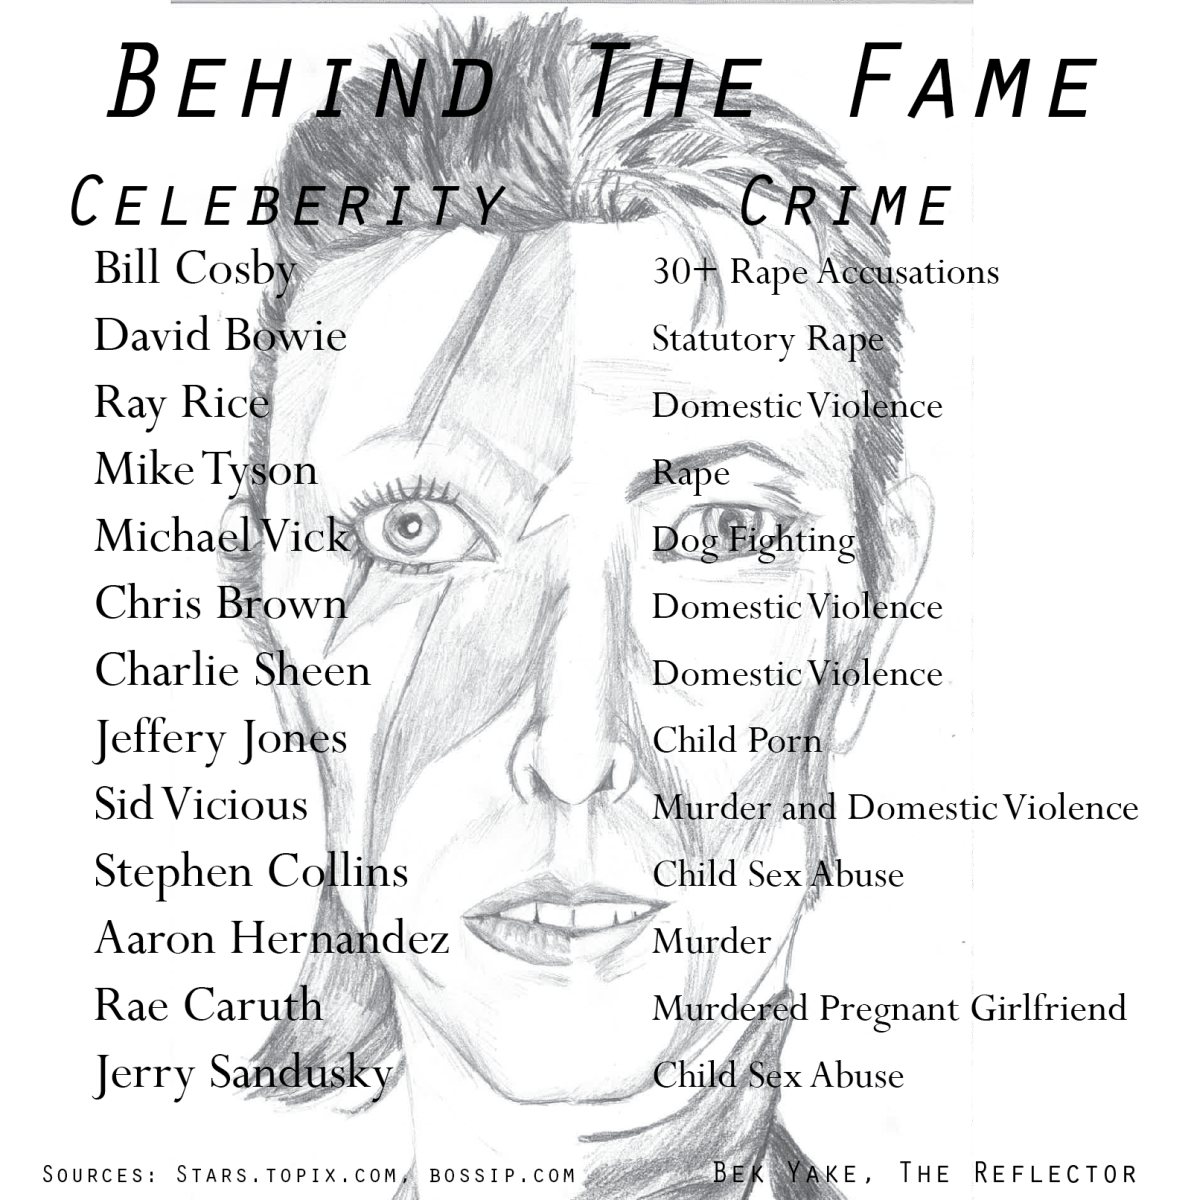 Behind the fame: celeberities and their crimes